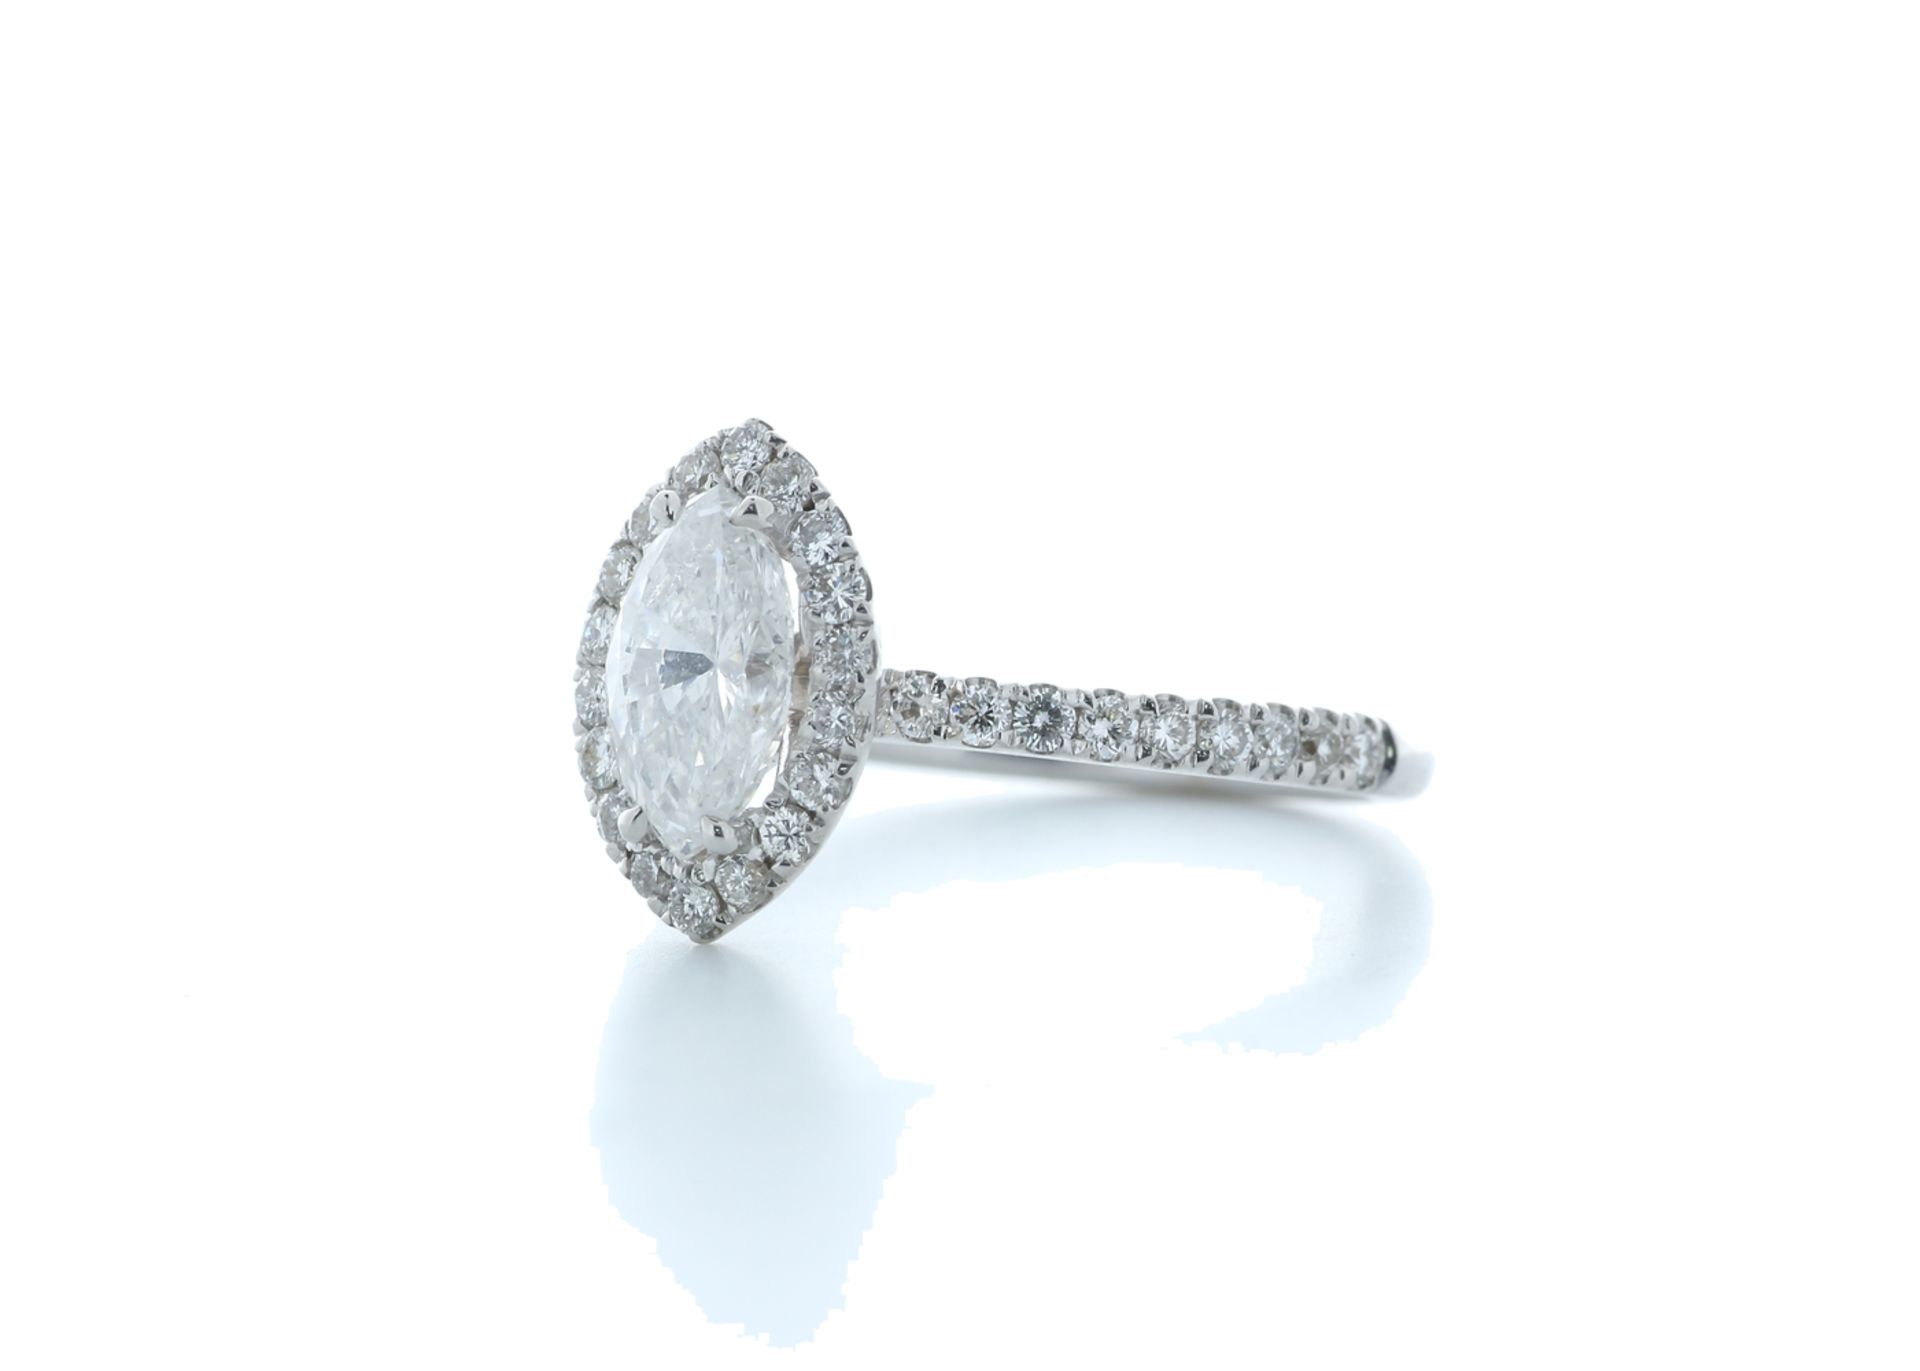 18ct White Gold Marquise Diamond With Halo Setting Ring 1.51 (1.02) Carats - Valued by IDI £13,000. - Image 2 of 5